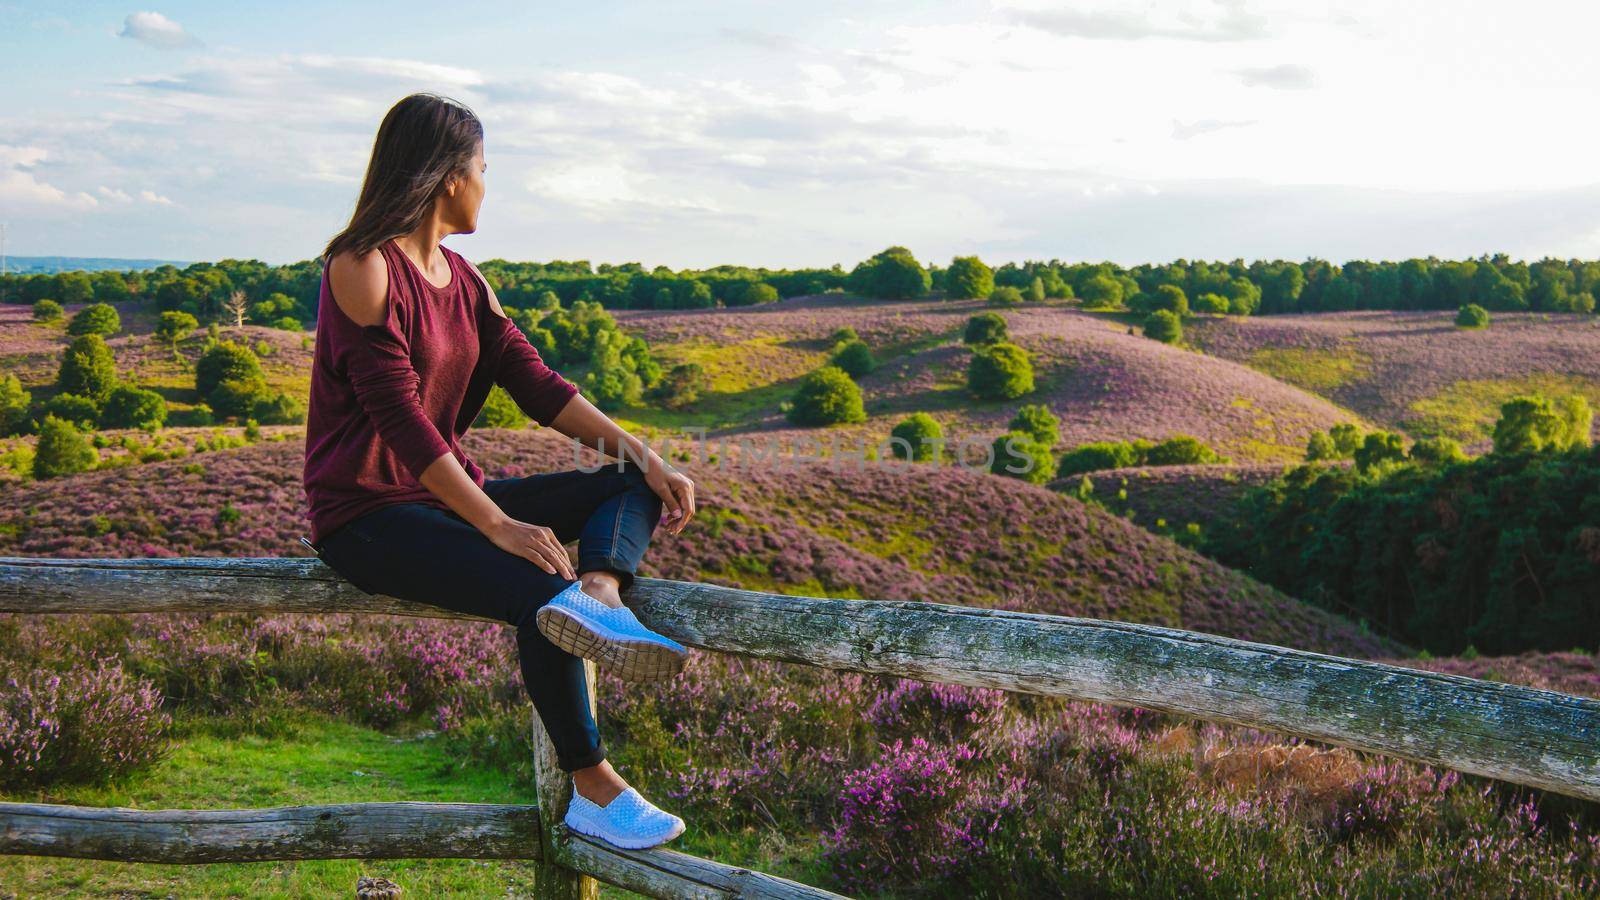 Posbank National park Veluwe, purple pink heather in bloom, blooming heater on the Veluwe by the Hills of the Posbank Rheden, Netherlands. woman looking out over heather fields